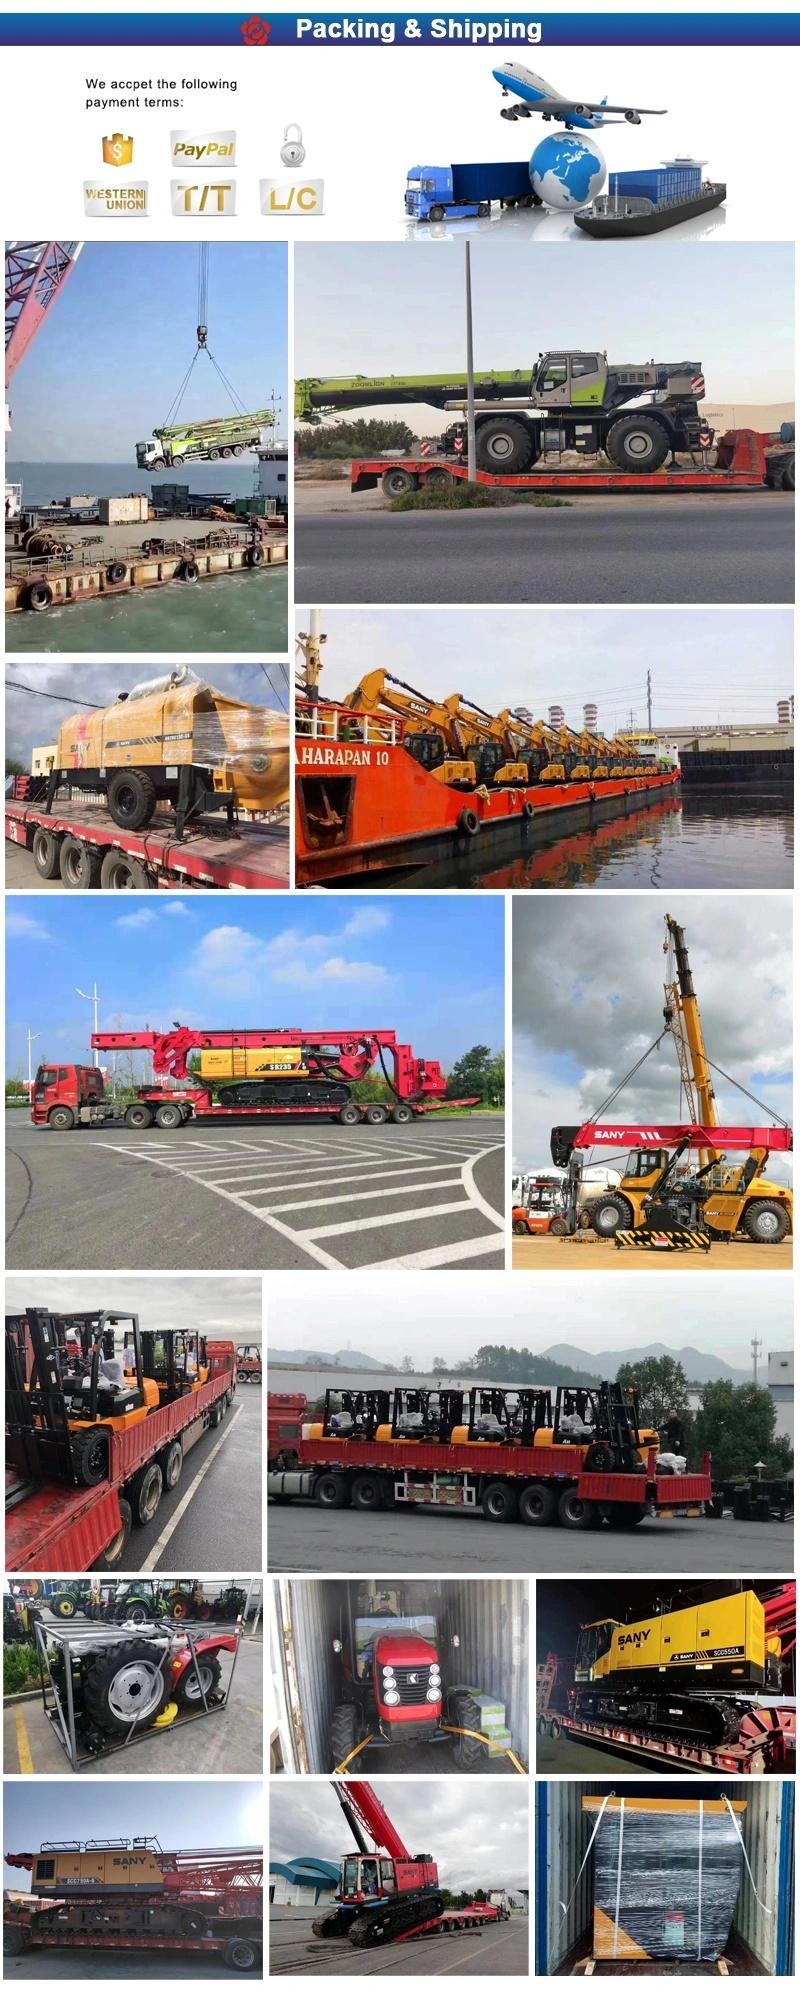 Chinese Famous Brand 47 Tons New Hydraulic Crawler Excavator with Good Quality for Sale